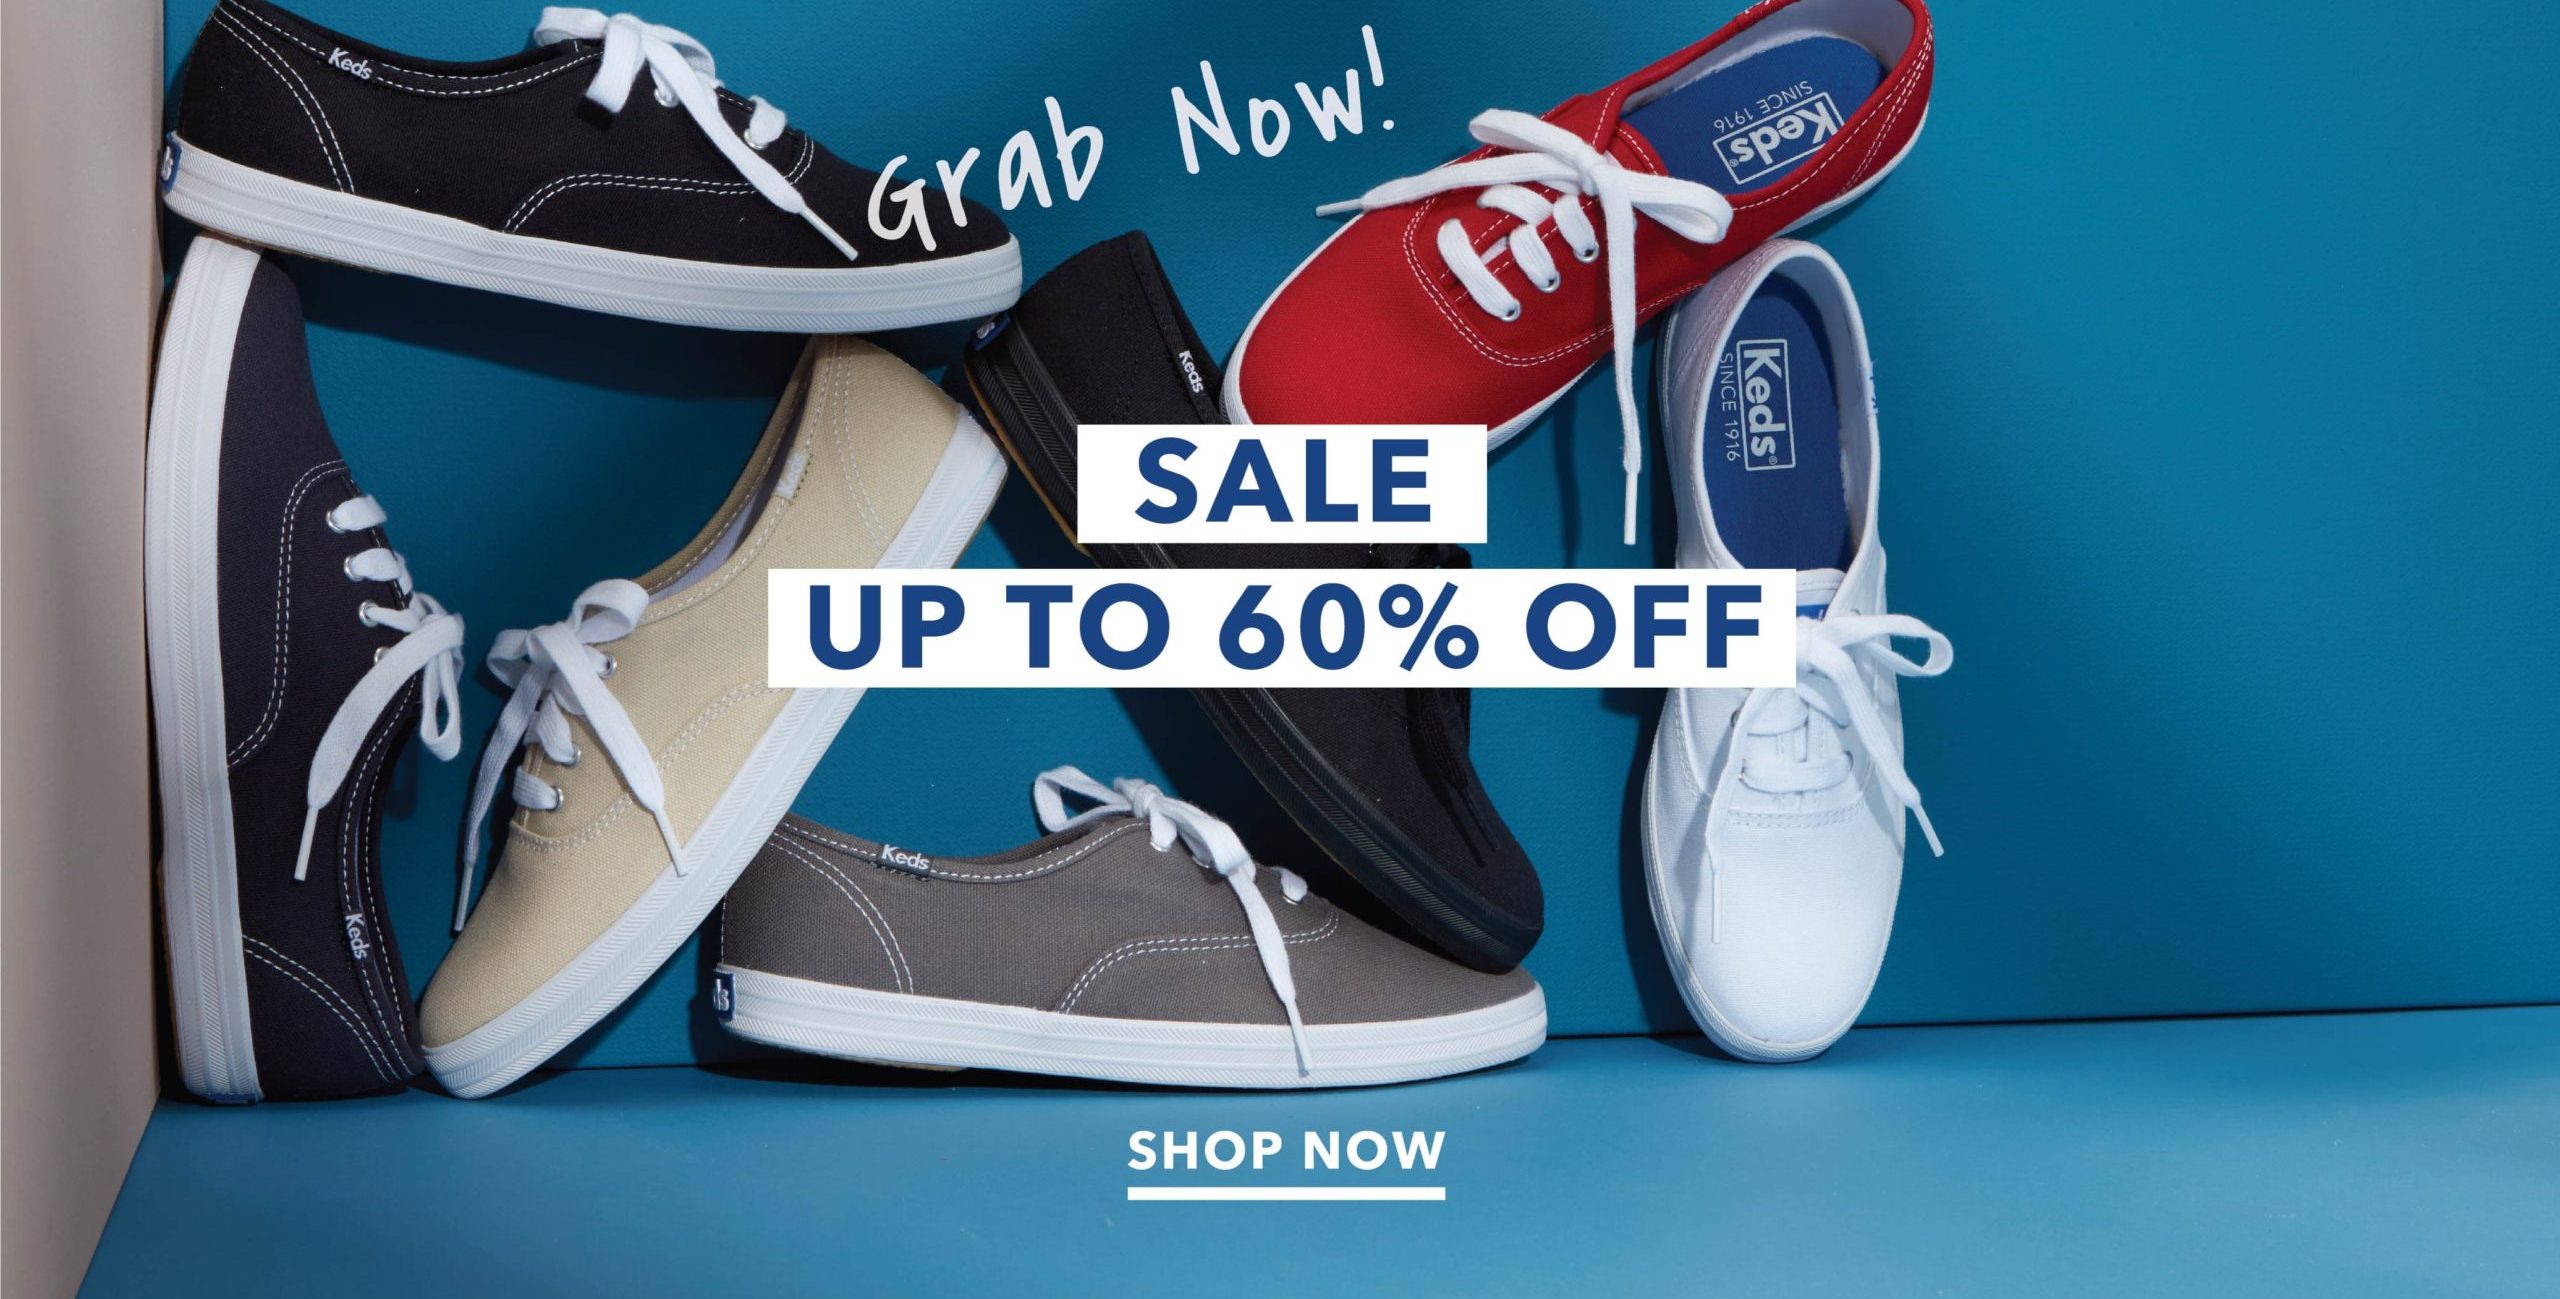 Keds - Official Keds Site – Free Shipping & Easy Returns! Shop Women’s sale keds, including canvas sneakers & leather tennis shoes, sandals, slip on shoes & more!